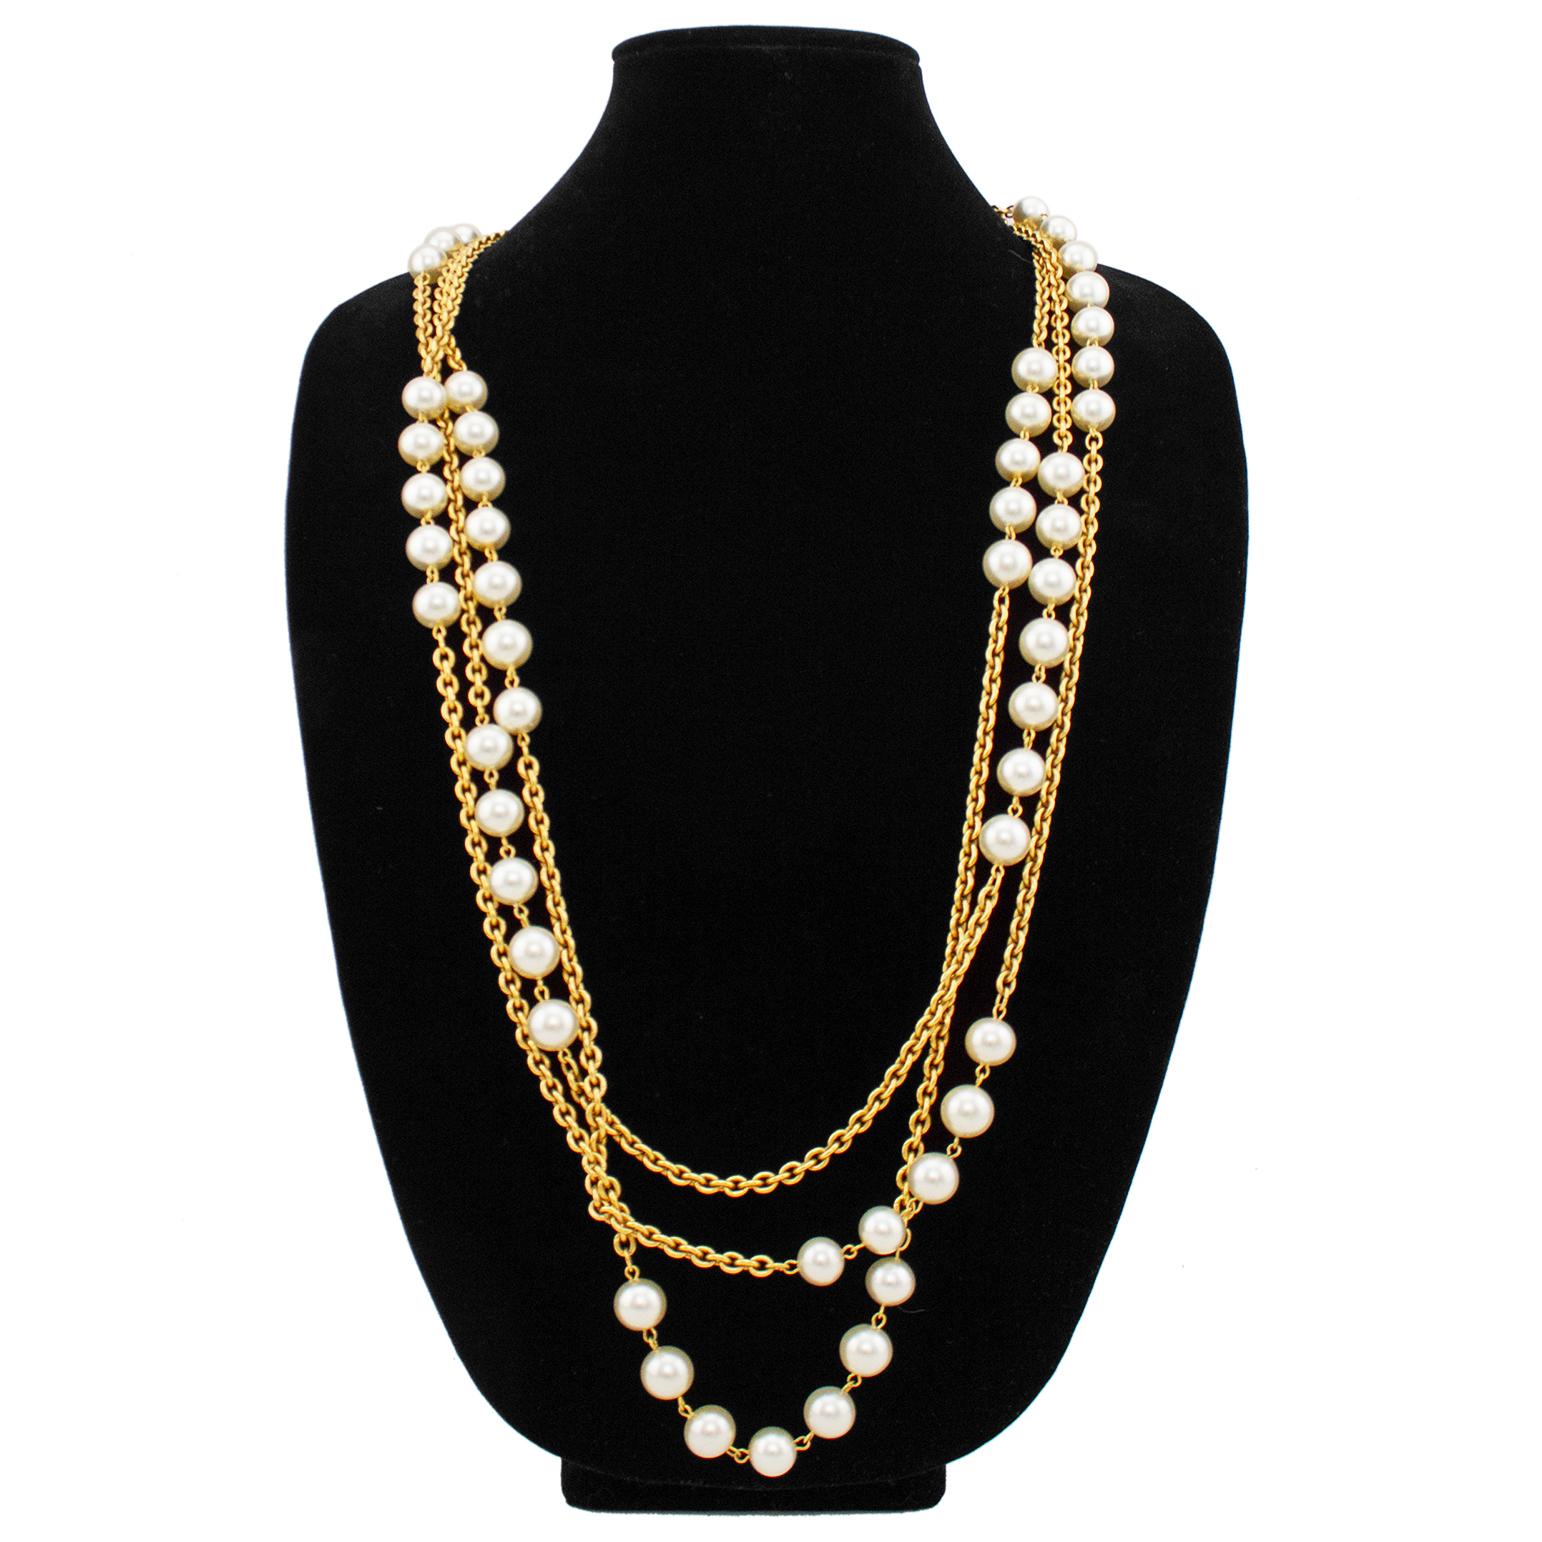 Fabulous large Chanel necklace from the late 1980s. Triple strand gold tone chain links with large faux pearls throughout. Two large gold tone jump rings at ends with a spring ring clasp. Hanging matching gold tone oval tag with brand stampings.